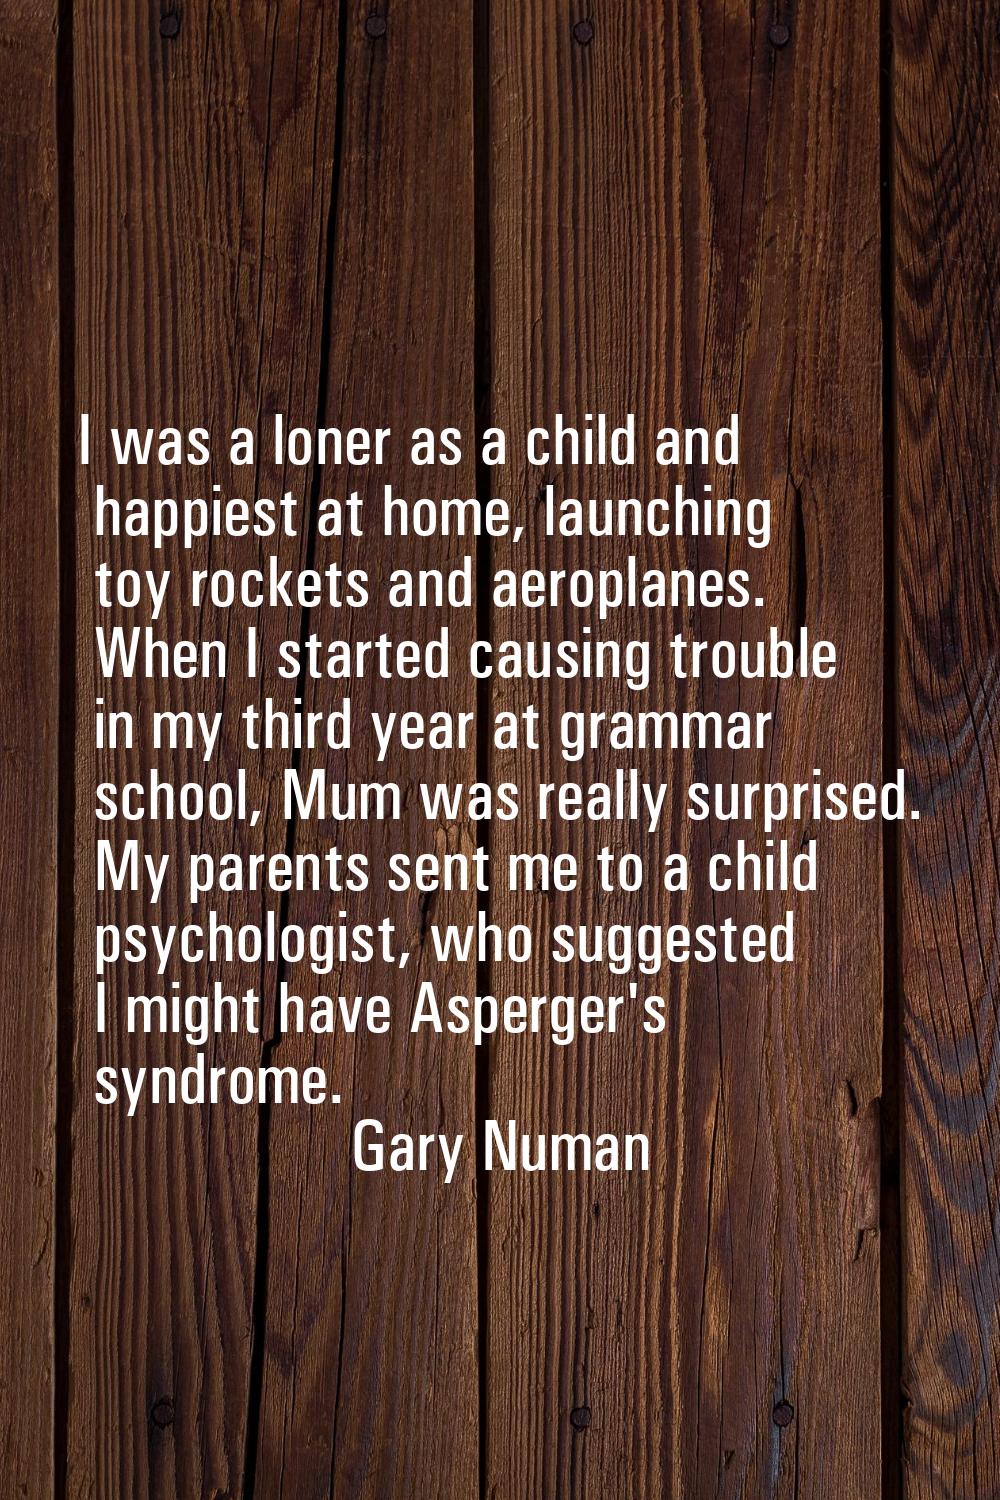 I was a loner as a child and happiest at home, launching toy rockets and aeroplanes. When I started